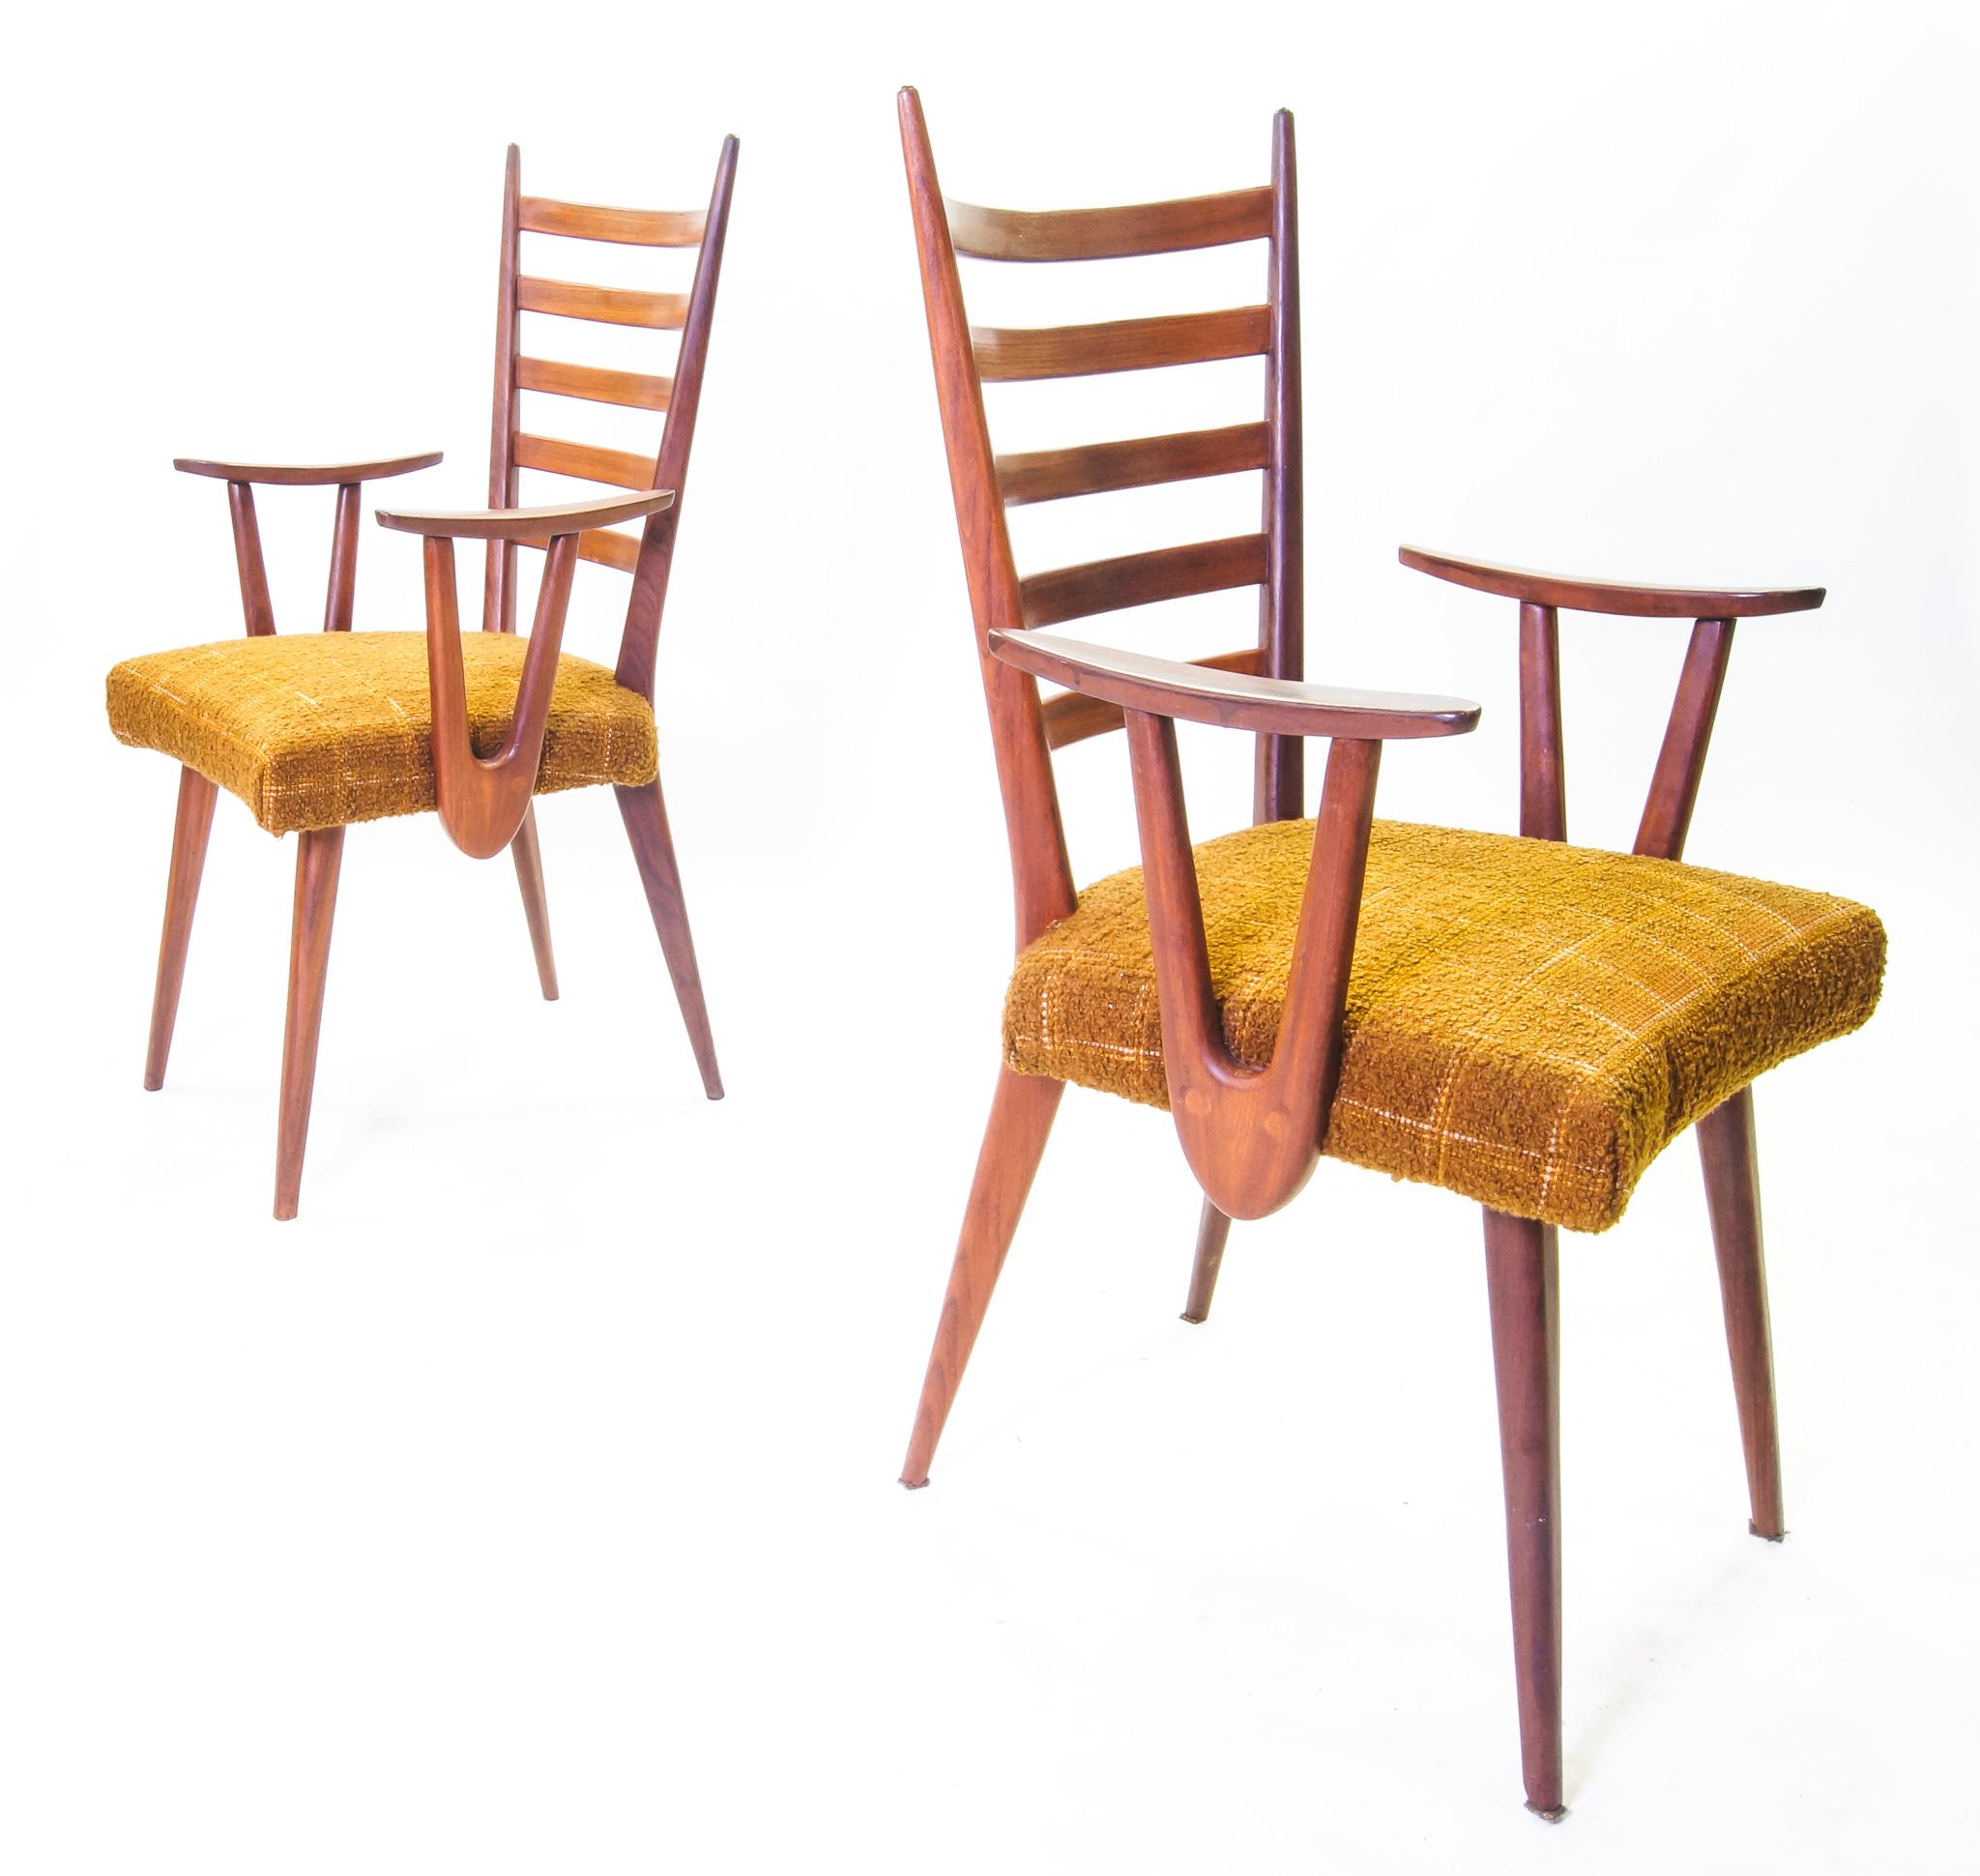 Mid-20th Century Cees Braakman for Pastoe - Ladder Chairs, 1950's - Dinerset of 6